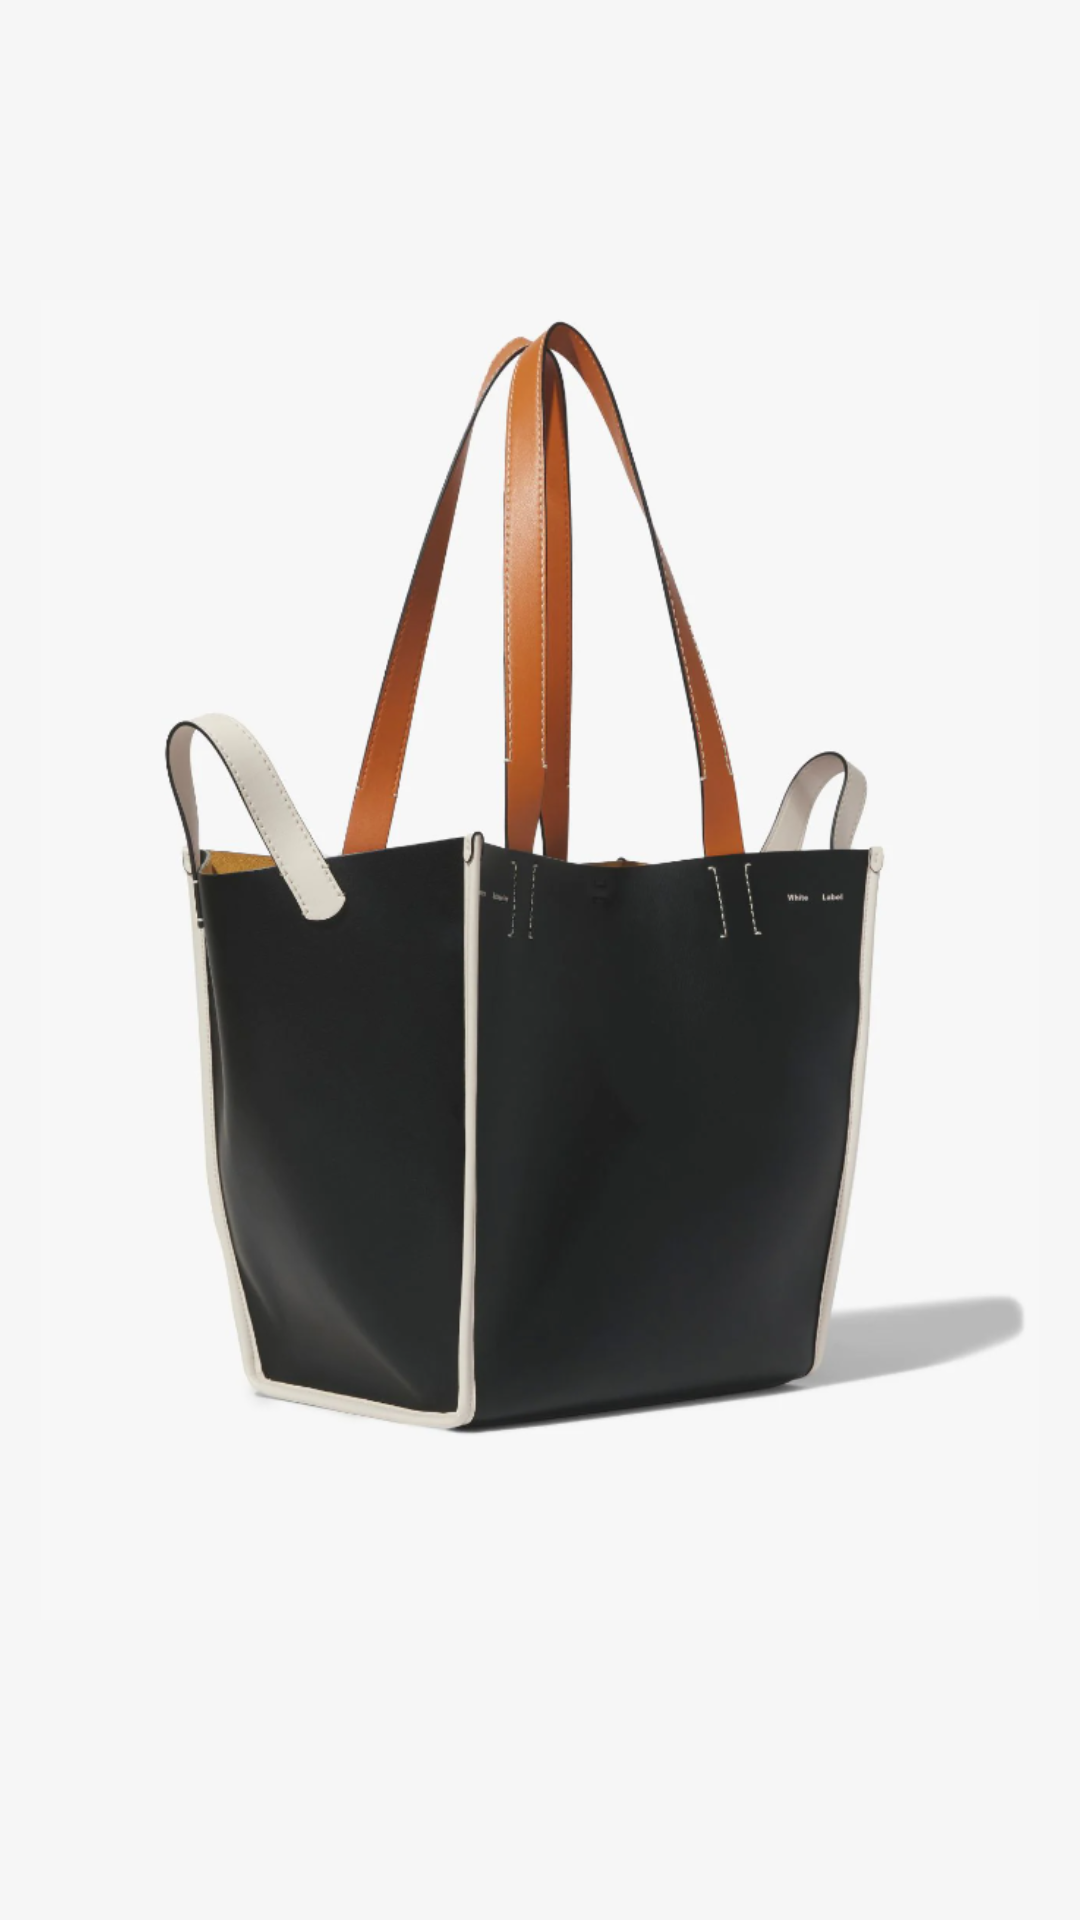 PSWL XL Mercer Leather Tote